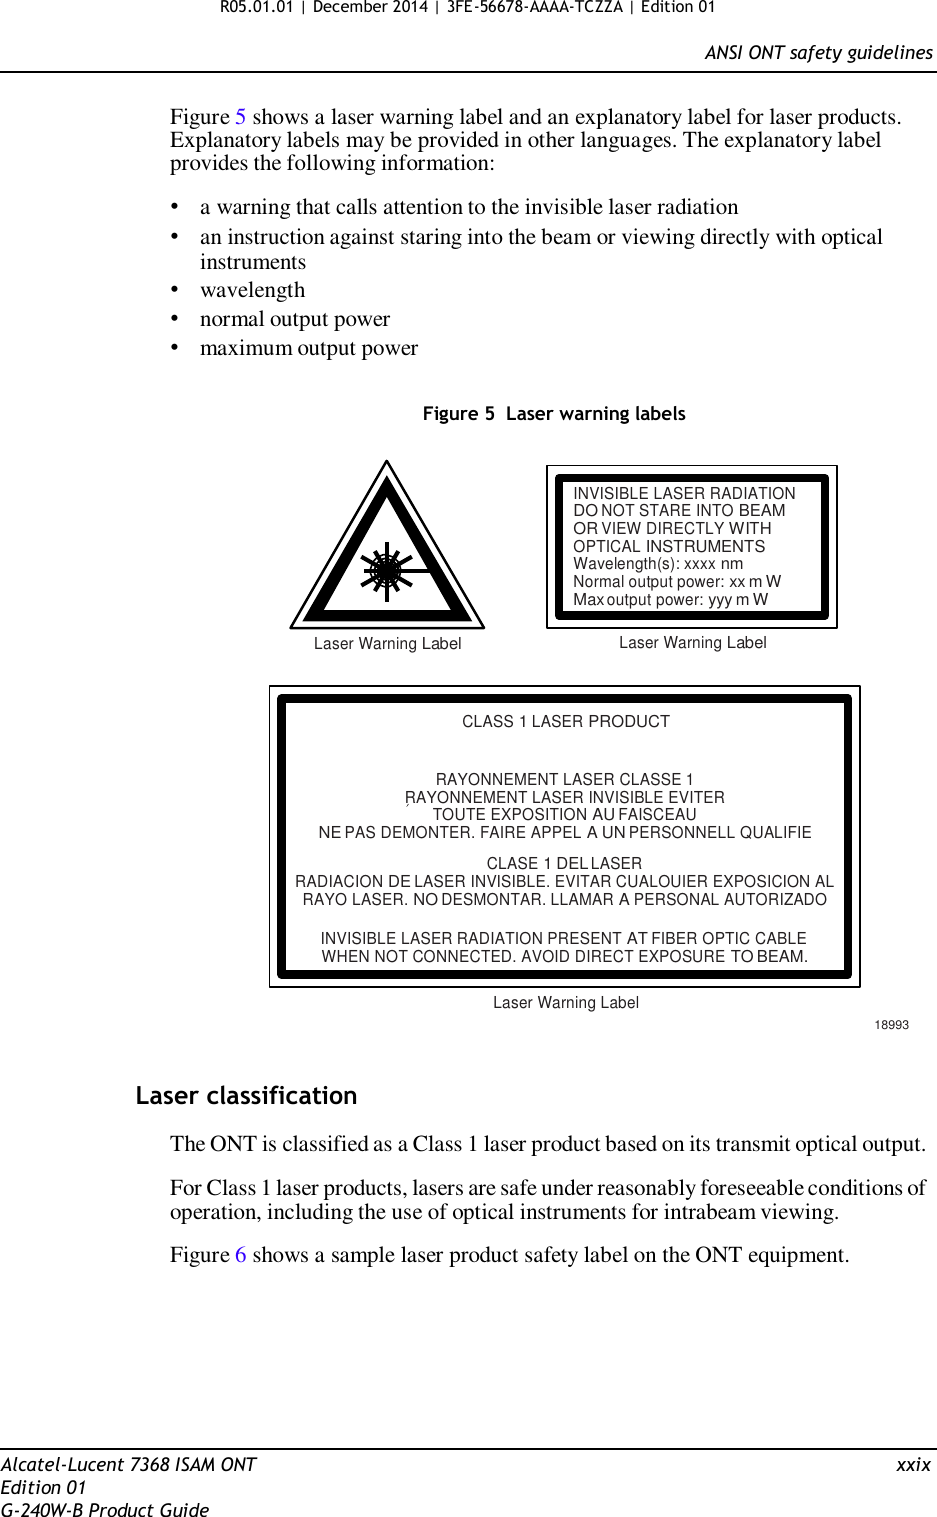 R05.01.01 | December 2014 | 3FE-56678-AAAA-TCZZA | Edition 01  ANSI ONT safety guidelines   Figure 5 shows a laser warning label and an explanatory label for laser products. Explanatory labels may be provided in other languages. The explanatory label provides the following information:  • a warning that calls attention to the invisible laser radiation • an instruction against staring into the beam or viewing directly with optical instruments • wavelength • normal output power • maximum output power   Figure 5  Laser warning labels    INVISIBLE LASER RADIATION DO NOT STARE INTO BEAM OR VIEW DIRECTLY WITH OPTICAL INSTRUMENTS Wavelength(s): xxxx nm Normal output power: xx m W Max output power: yyy m W  Laser Warning Label Laser Warning Label    CLASS 1 LASER PRODUCT   RAYONNEMENT LASER CLASSE 1 RAYONNEMENT LASER INVISIBLE EVITER TOUTE EXPOSITION AU FAISCEAU NE PAS DEMONTER. FAIRE APPEL A UN PERSONNELL QUALIFIE  CLASE 1 DEL LASER RADIACION DE LASER INVISIBLE. EVITAR CUALOUIER EXPOSICION AL RAYO LASER. NO DESMONTAR. LLAMAR A PERSONAL AUTORIZADO  INVISIBLE LASER RADIATION PRESENT AT FIBER OPTIC CABLE WHEN NOT CONNECTED. AVOID DIRECT EXPOSURE TO BEAM.  Laser Warning Label  18993   Laser classification The ONT is classified as a Class 1 laser product based on its transmit optical output. For Class 1 laser products, lasers are safe under reasonably foreseeable conditions of operation, including the use of optical instruments for intrabeam viewing.  Figure 6 shows a sample laser product safety label on the ONT equipment.          Alcatel-Lucent 7368 ISAM ONT  xxix Edition 01 G-240W-B Product Guide 